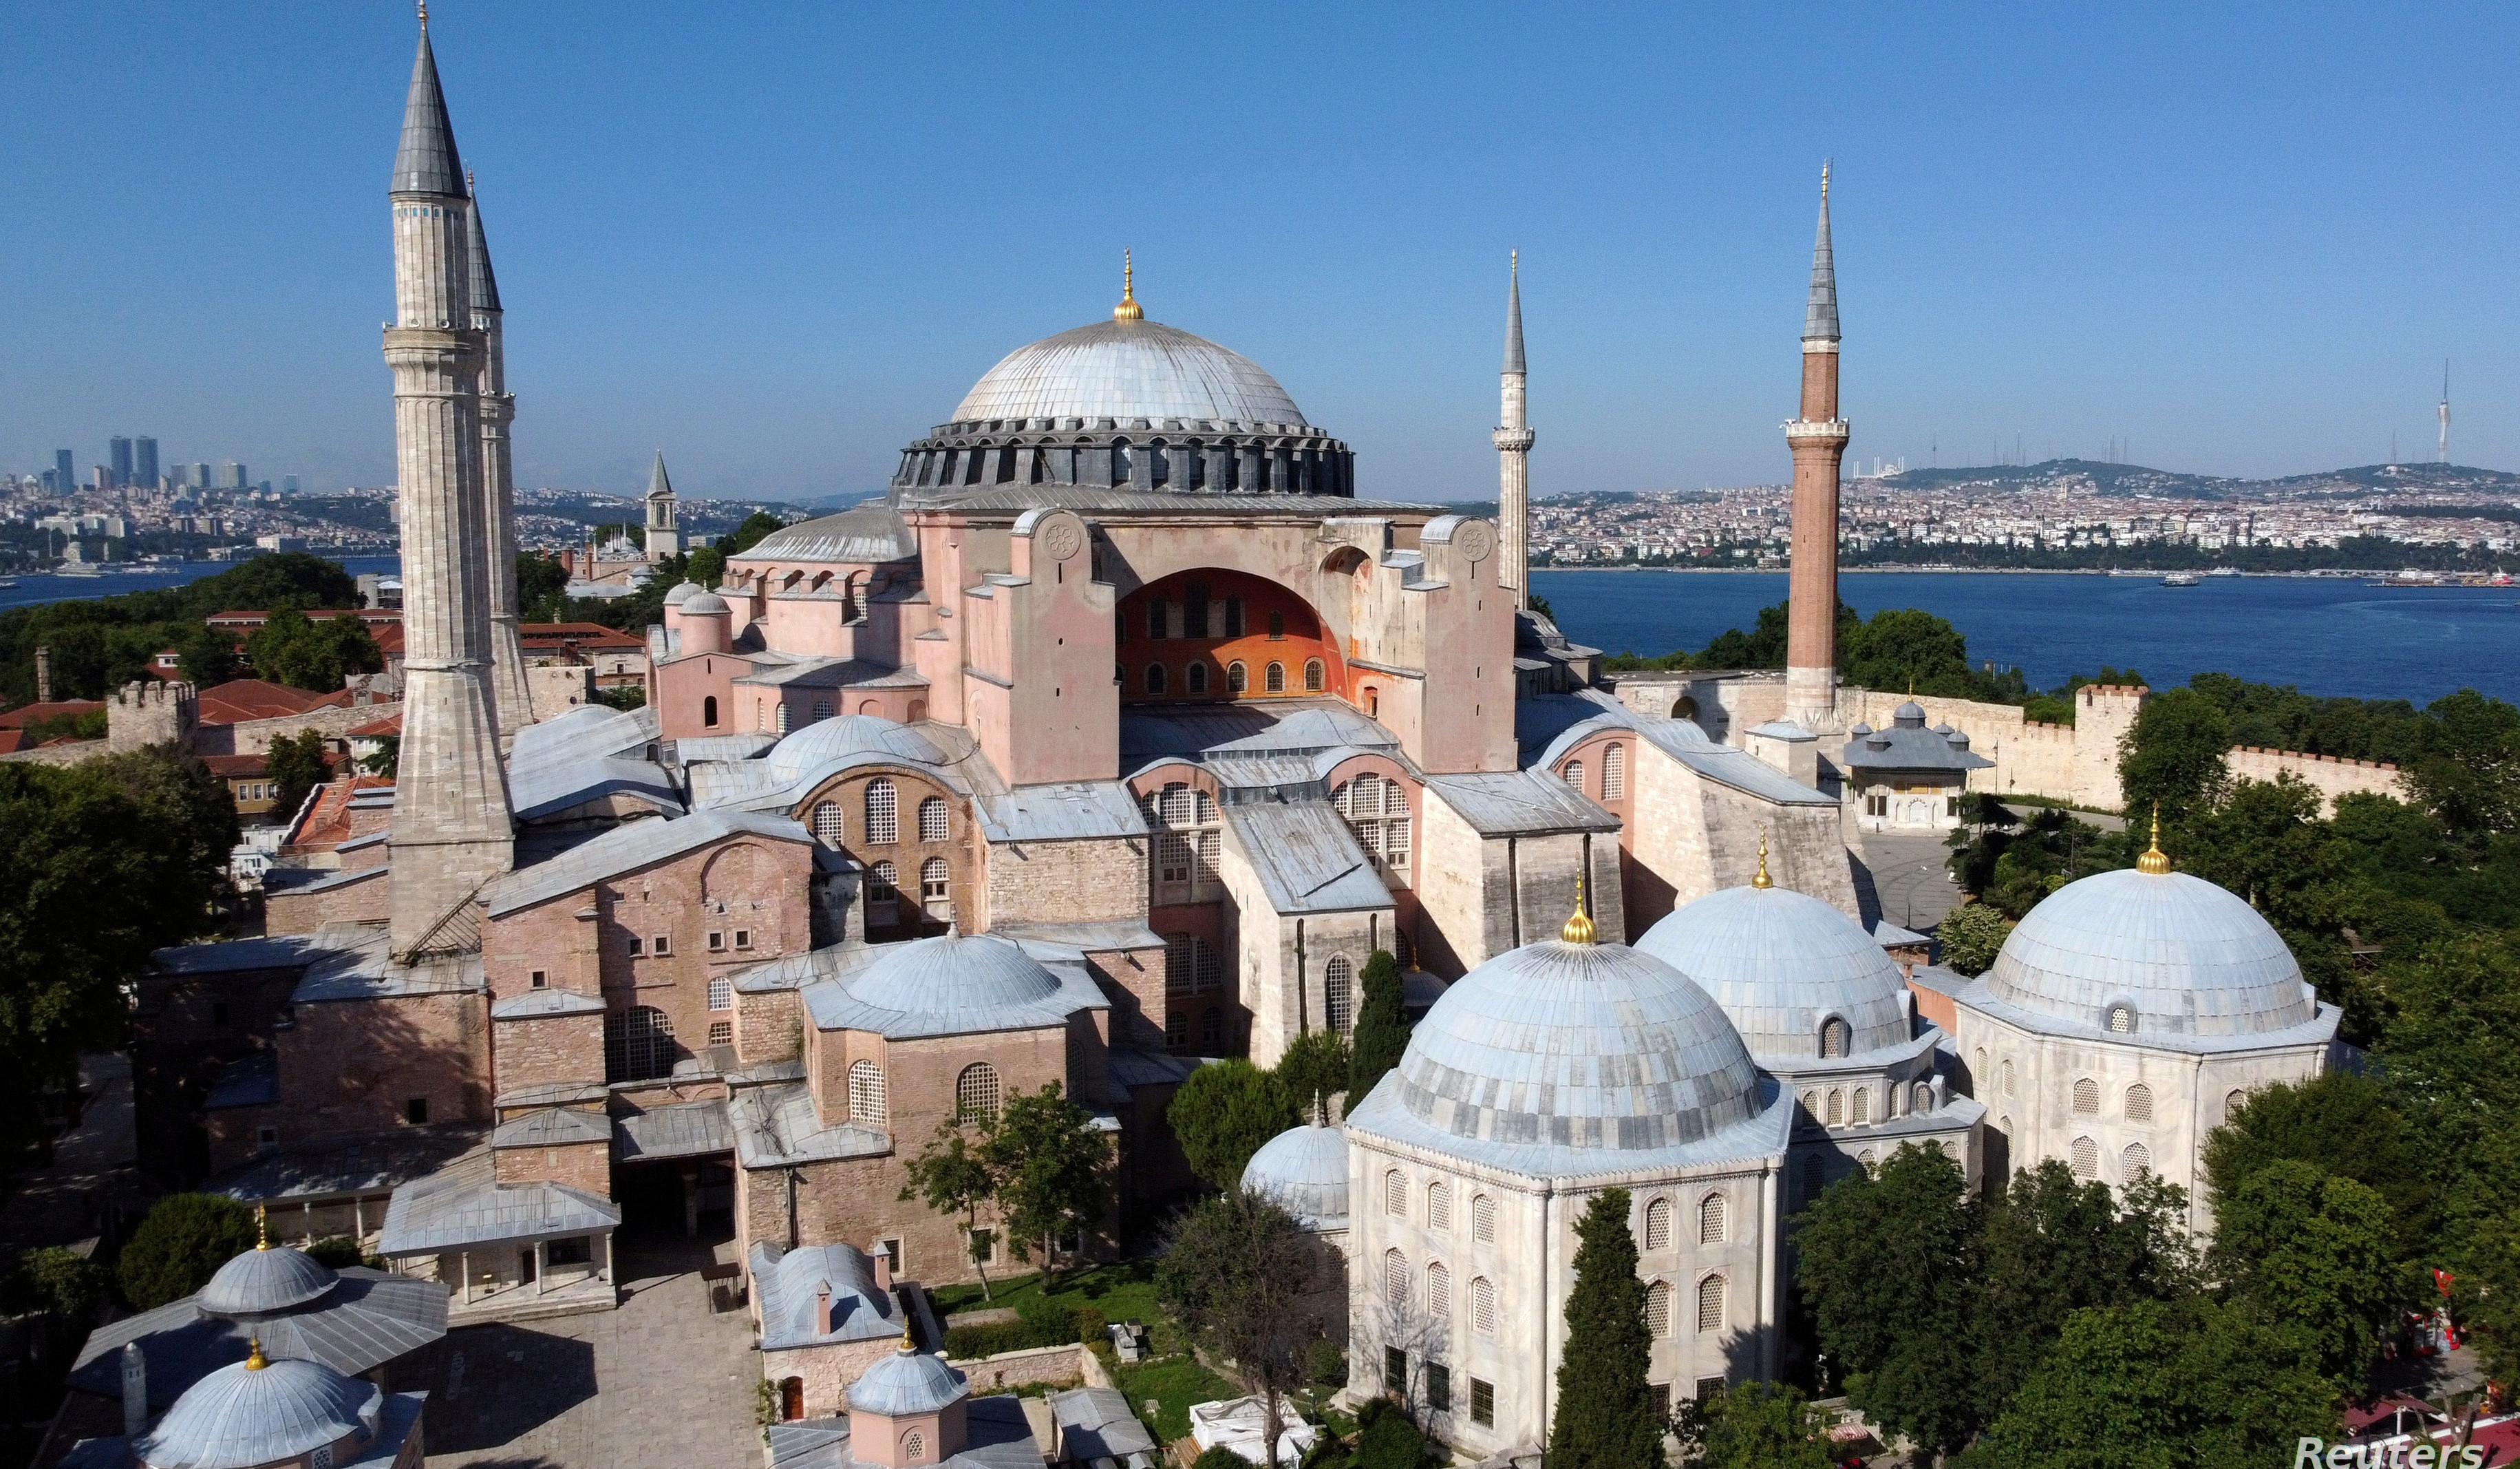 UNESCO asks Turkey for report on Hagia Sophia after mosque change